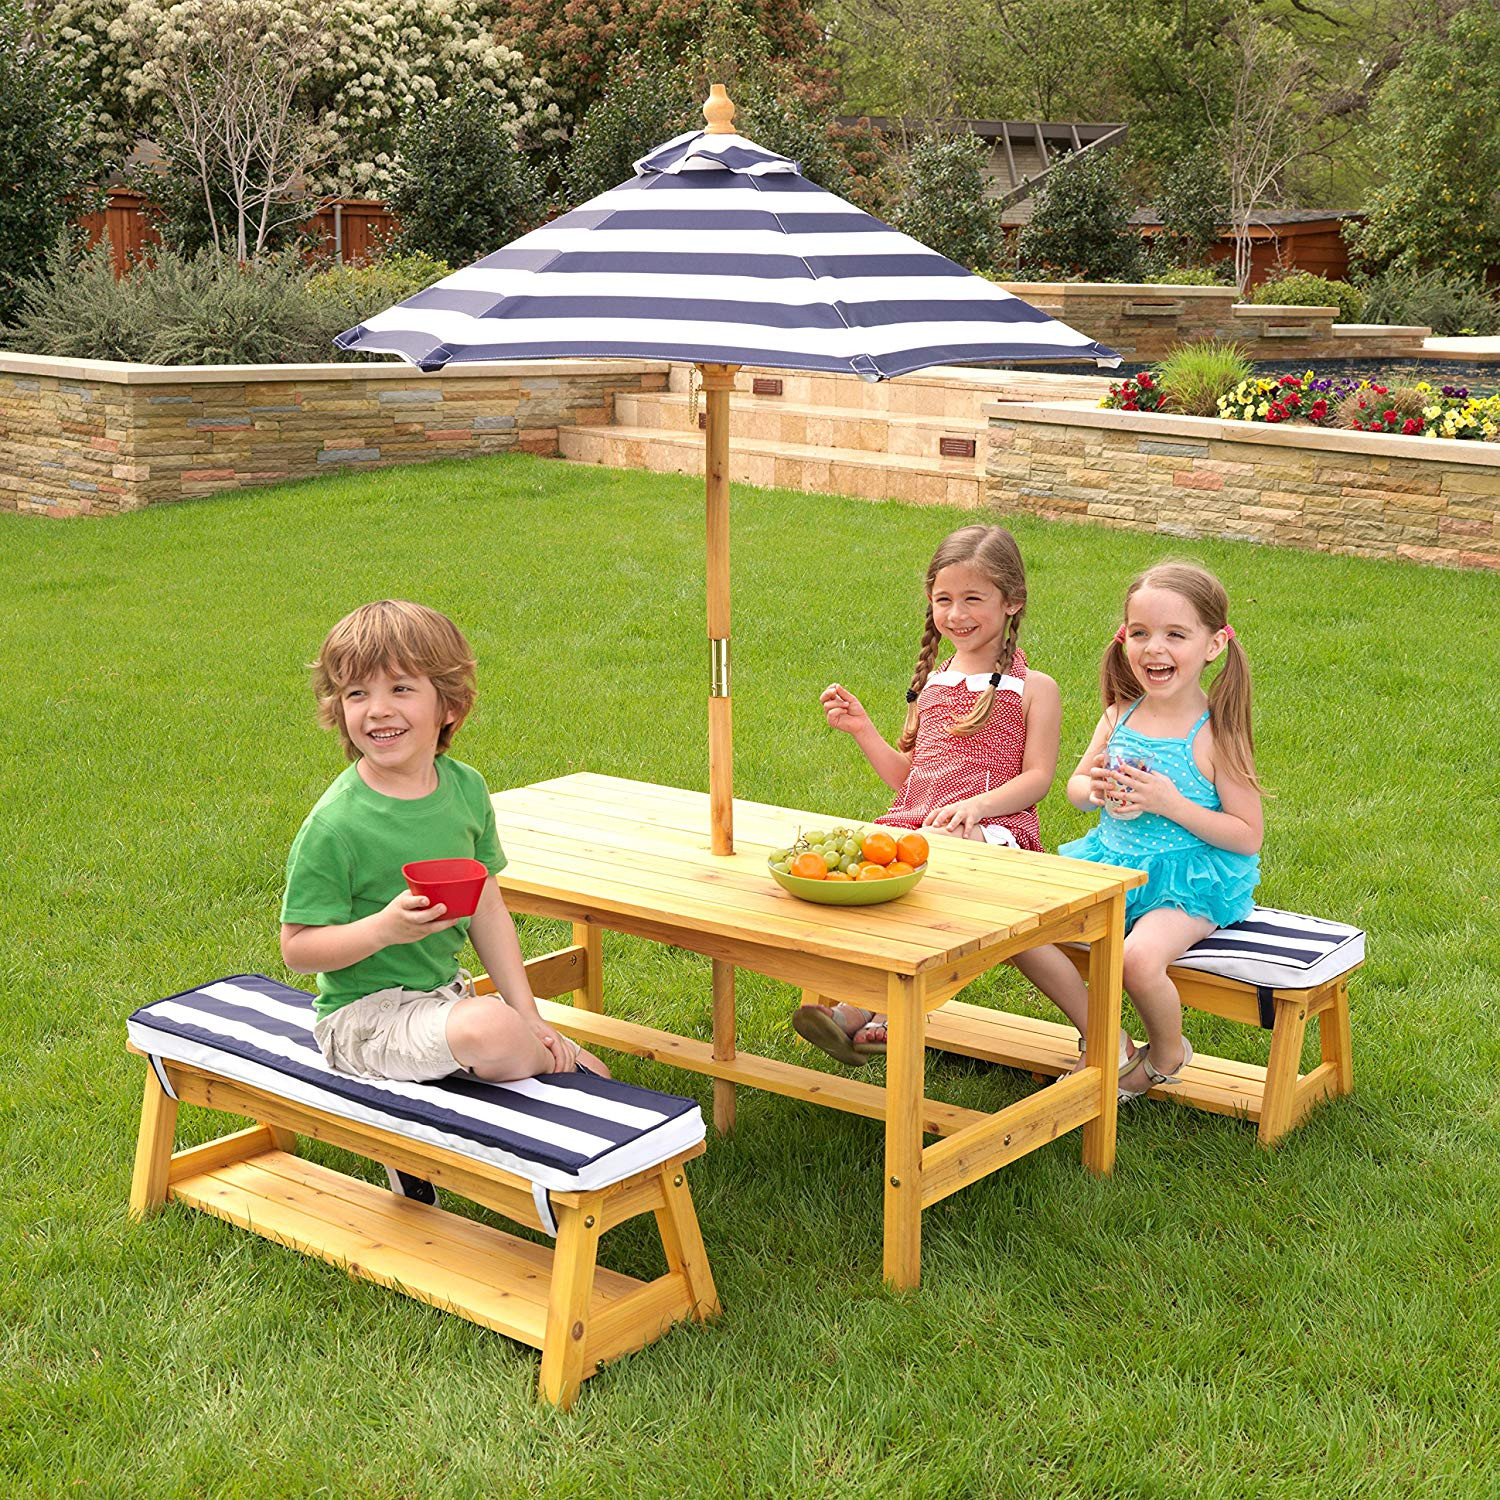 Picnic Table For Kids
 Top 10 Best Kids Picnic Tables in 2020 Reviews